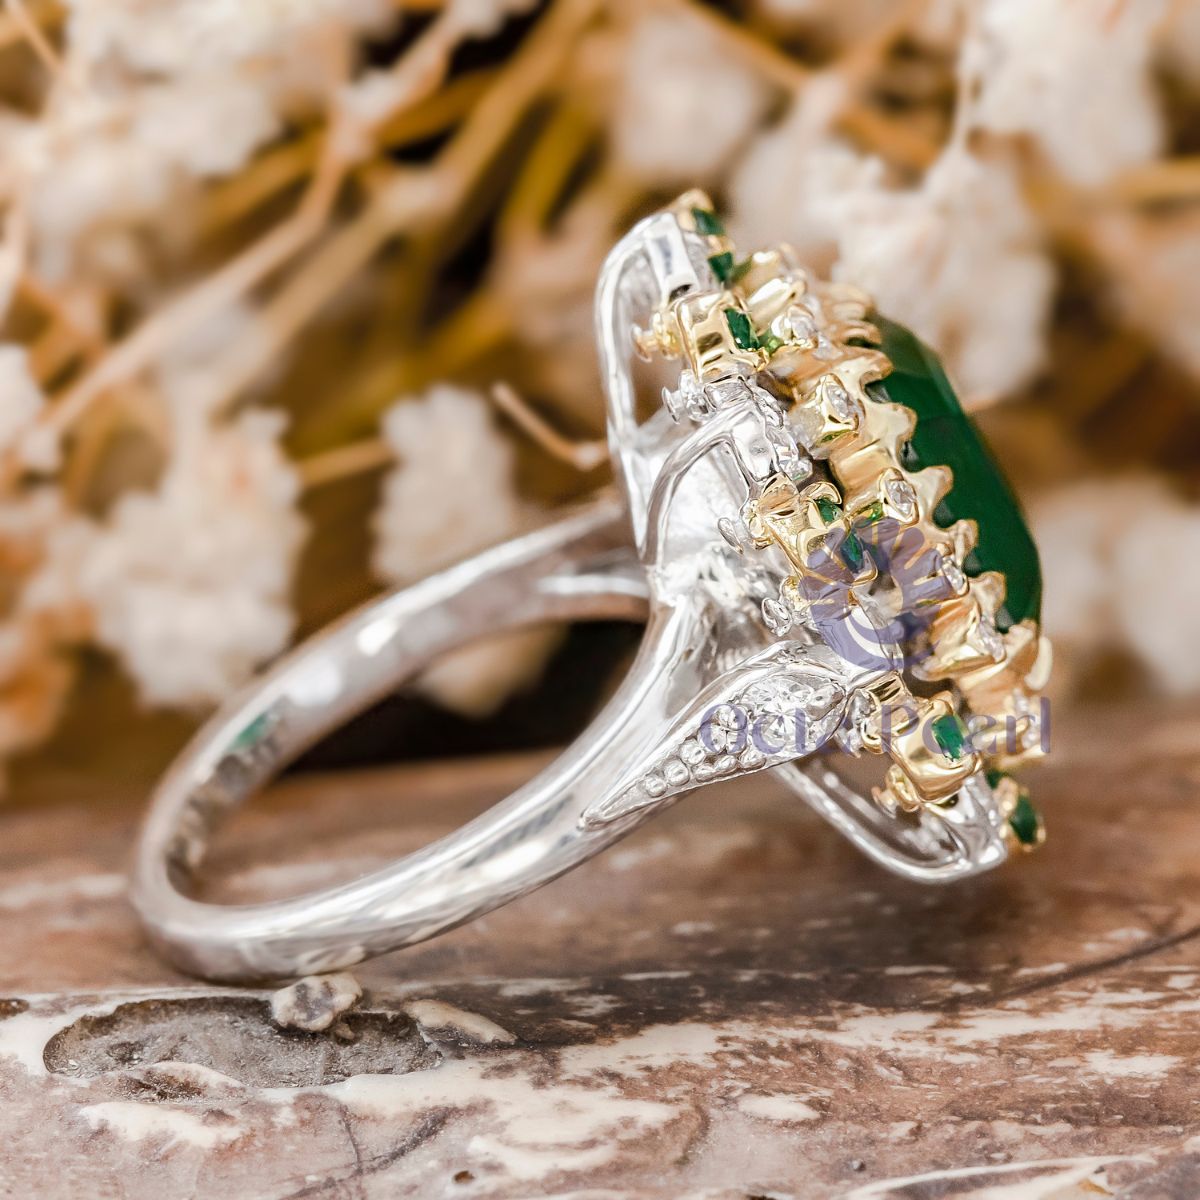 Emerald CZ Stone Two Tone Gold Floral Cocktail Ring